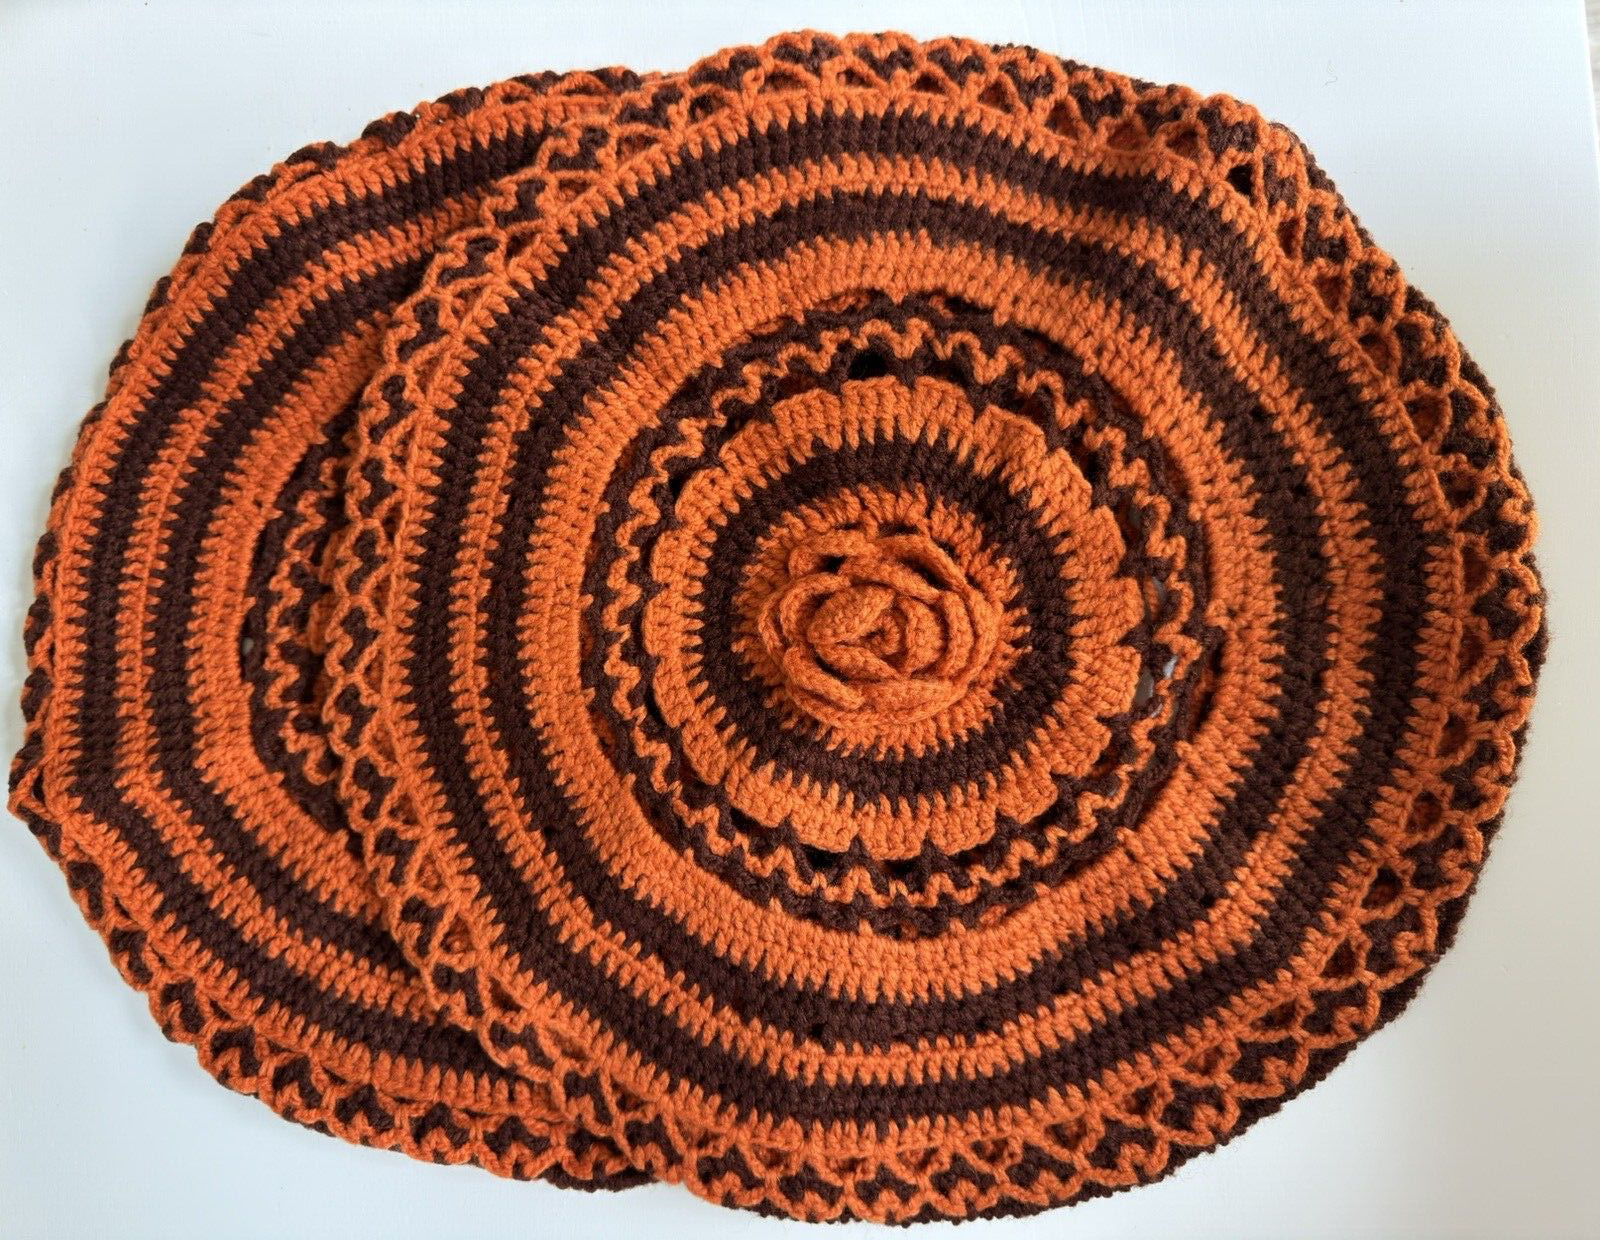 Lot of 2 Vintage Circle Pillow Cover Crocheted Yarn Orange Brown - 14\